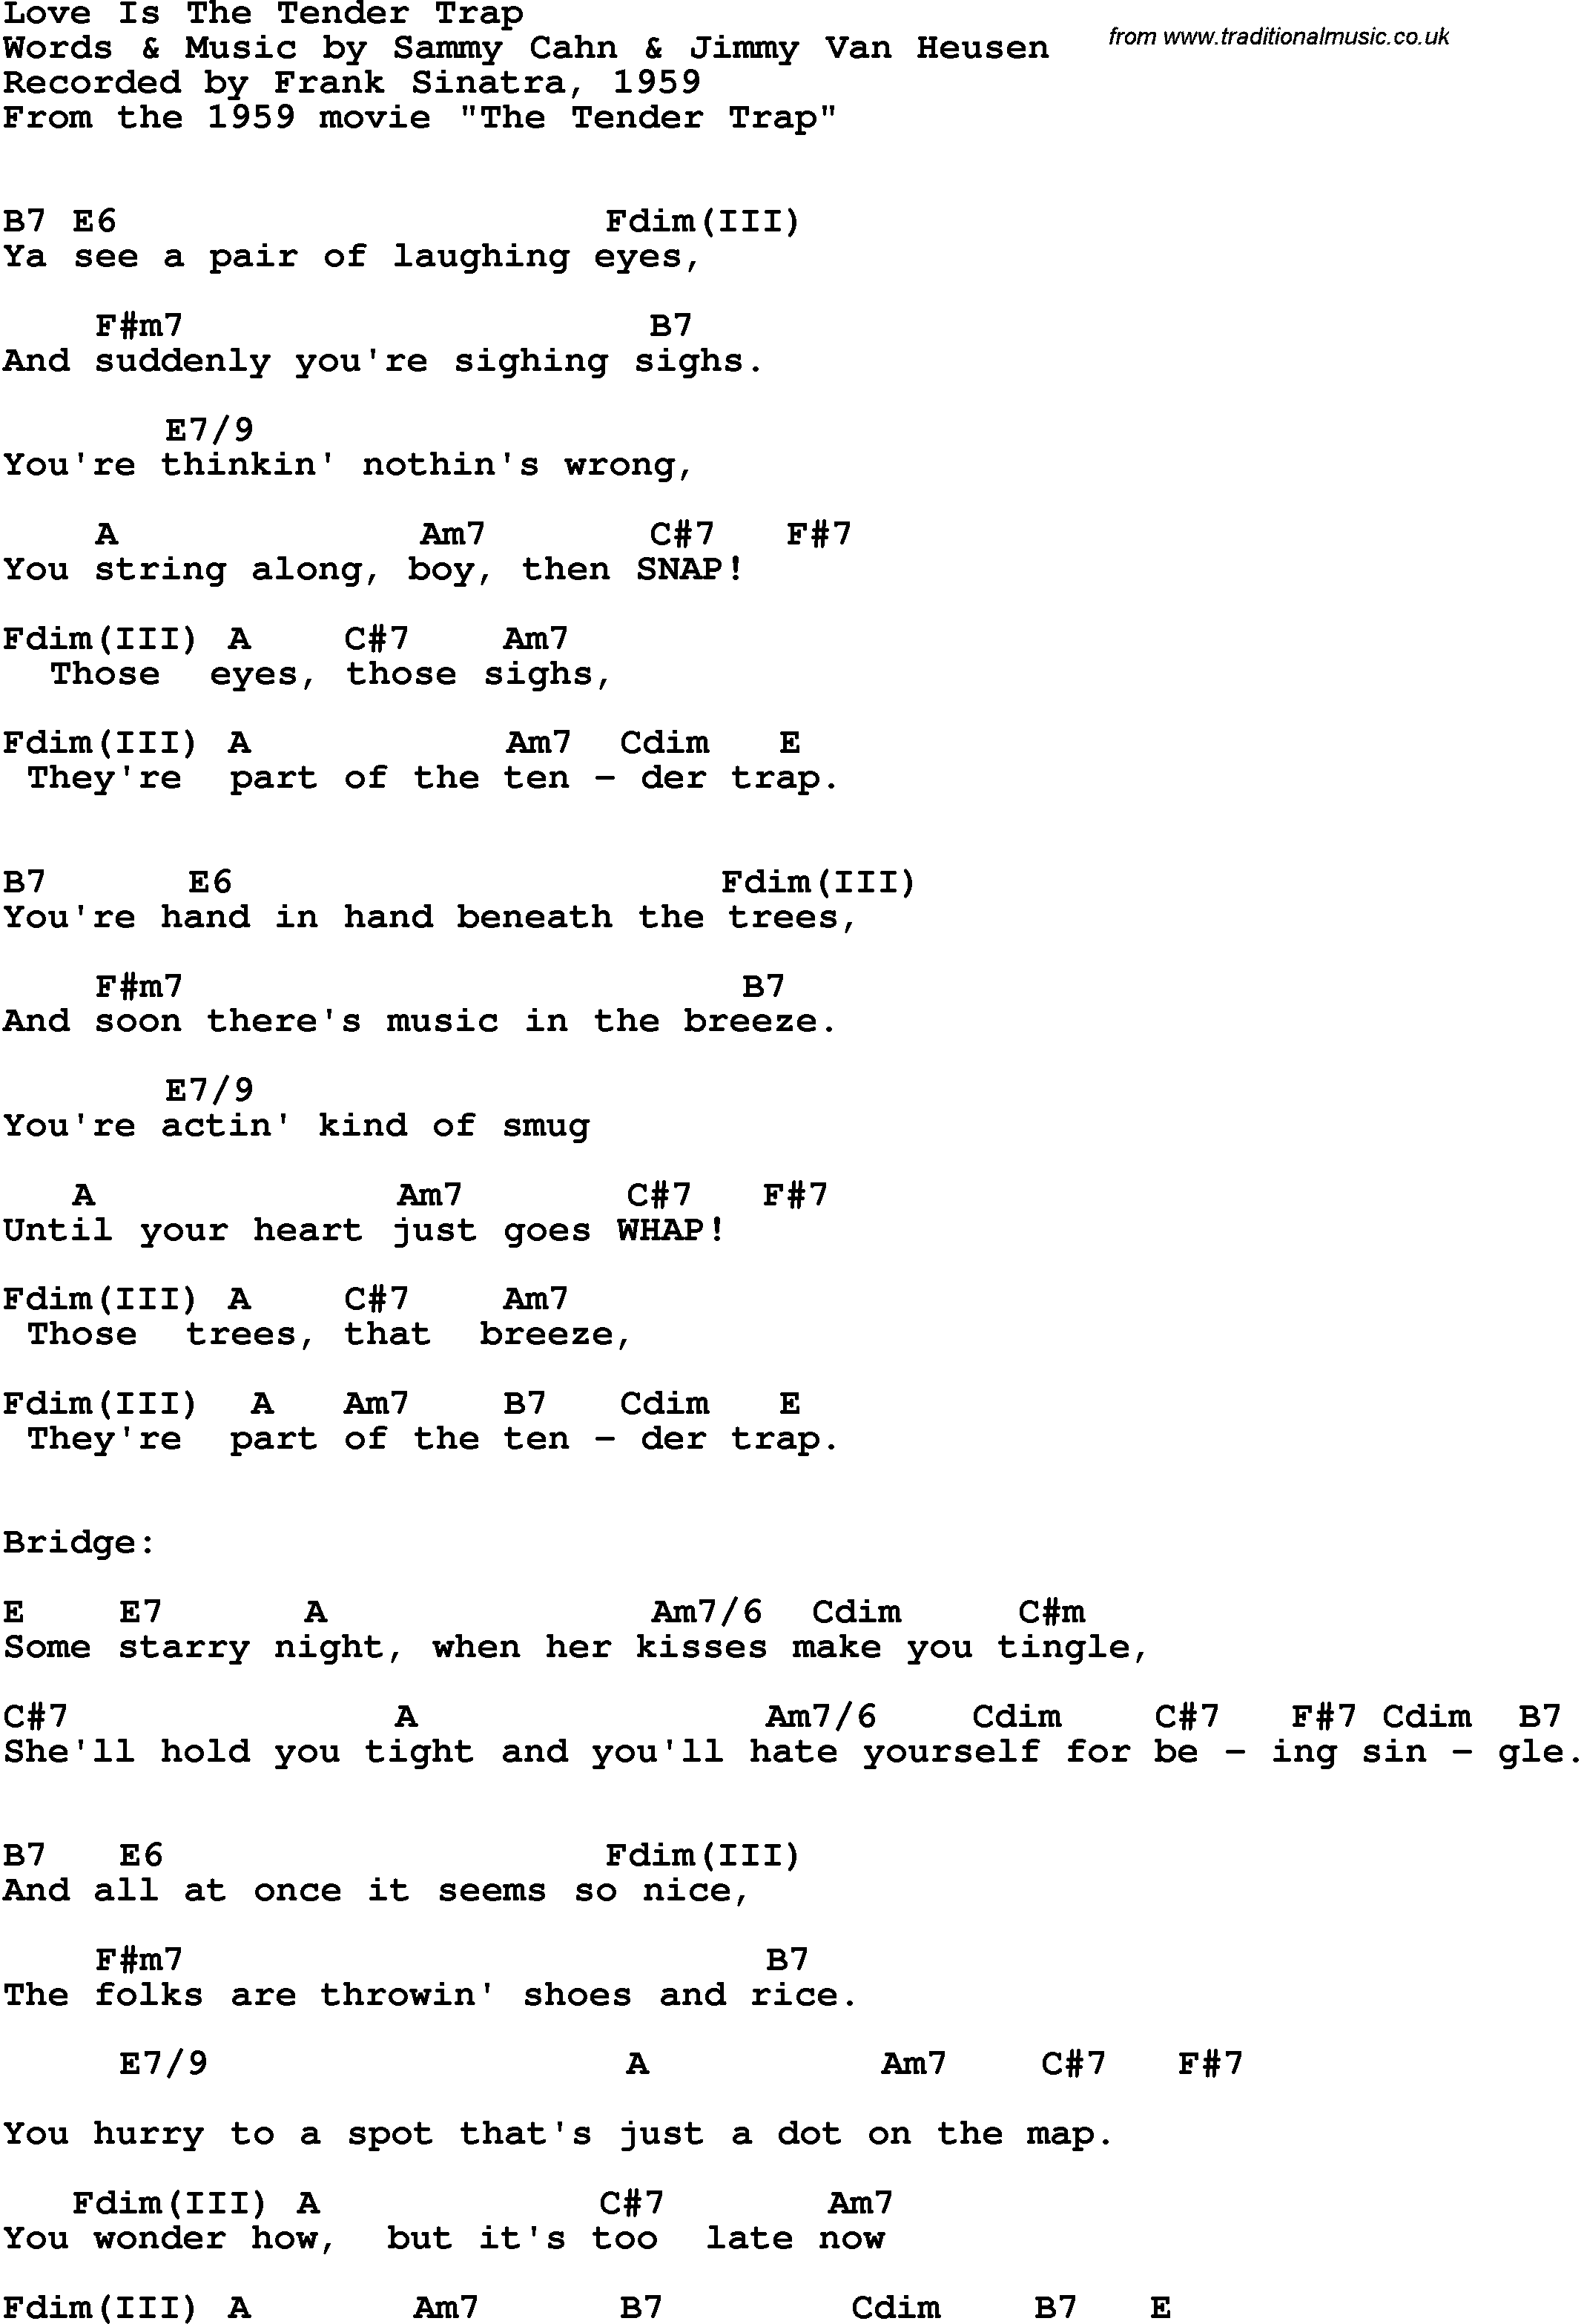 Song Lyrics with guitar chords for Love Is The Tender Trap - Frank Sinatra, 1959